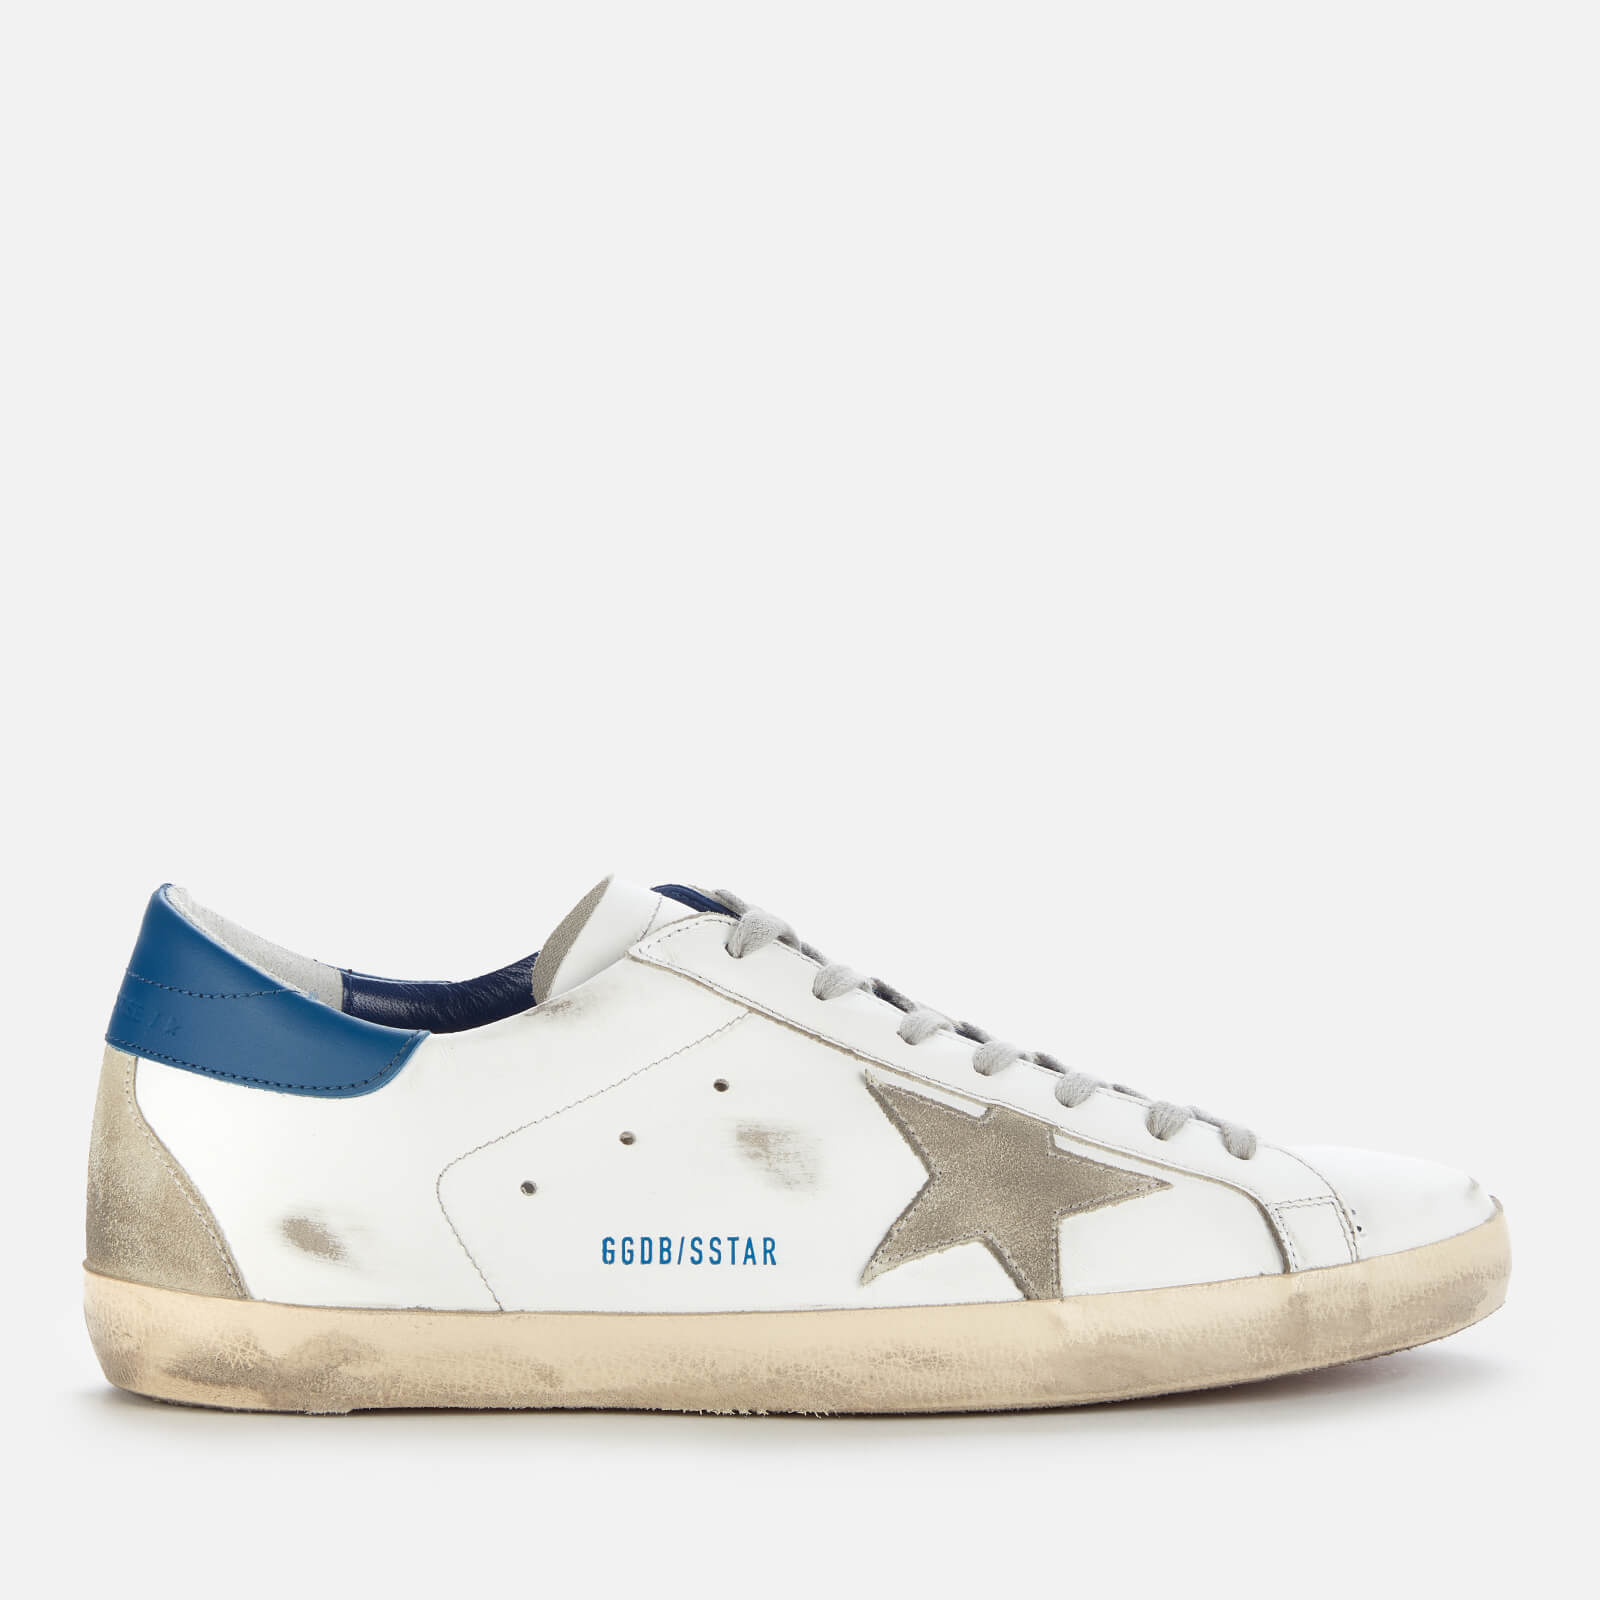 Golden Goose Deluxe Brand Men's Superstar Leather Trainers - White/Ice/Blue - UK 10